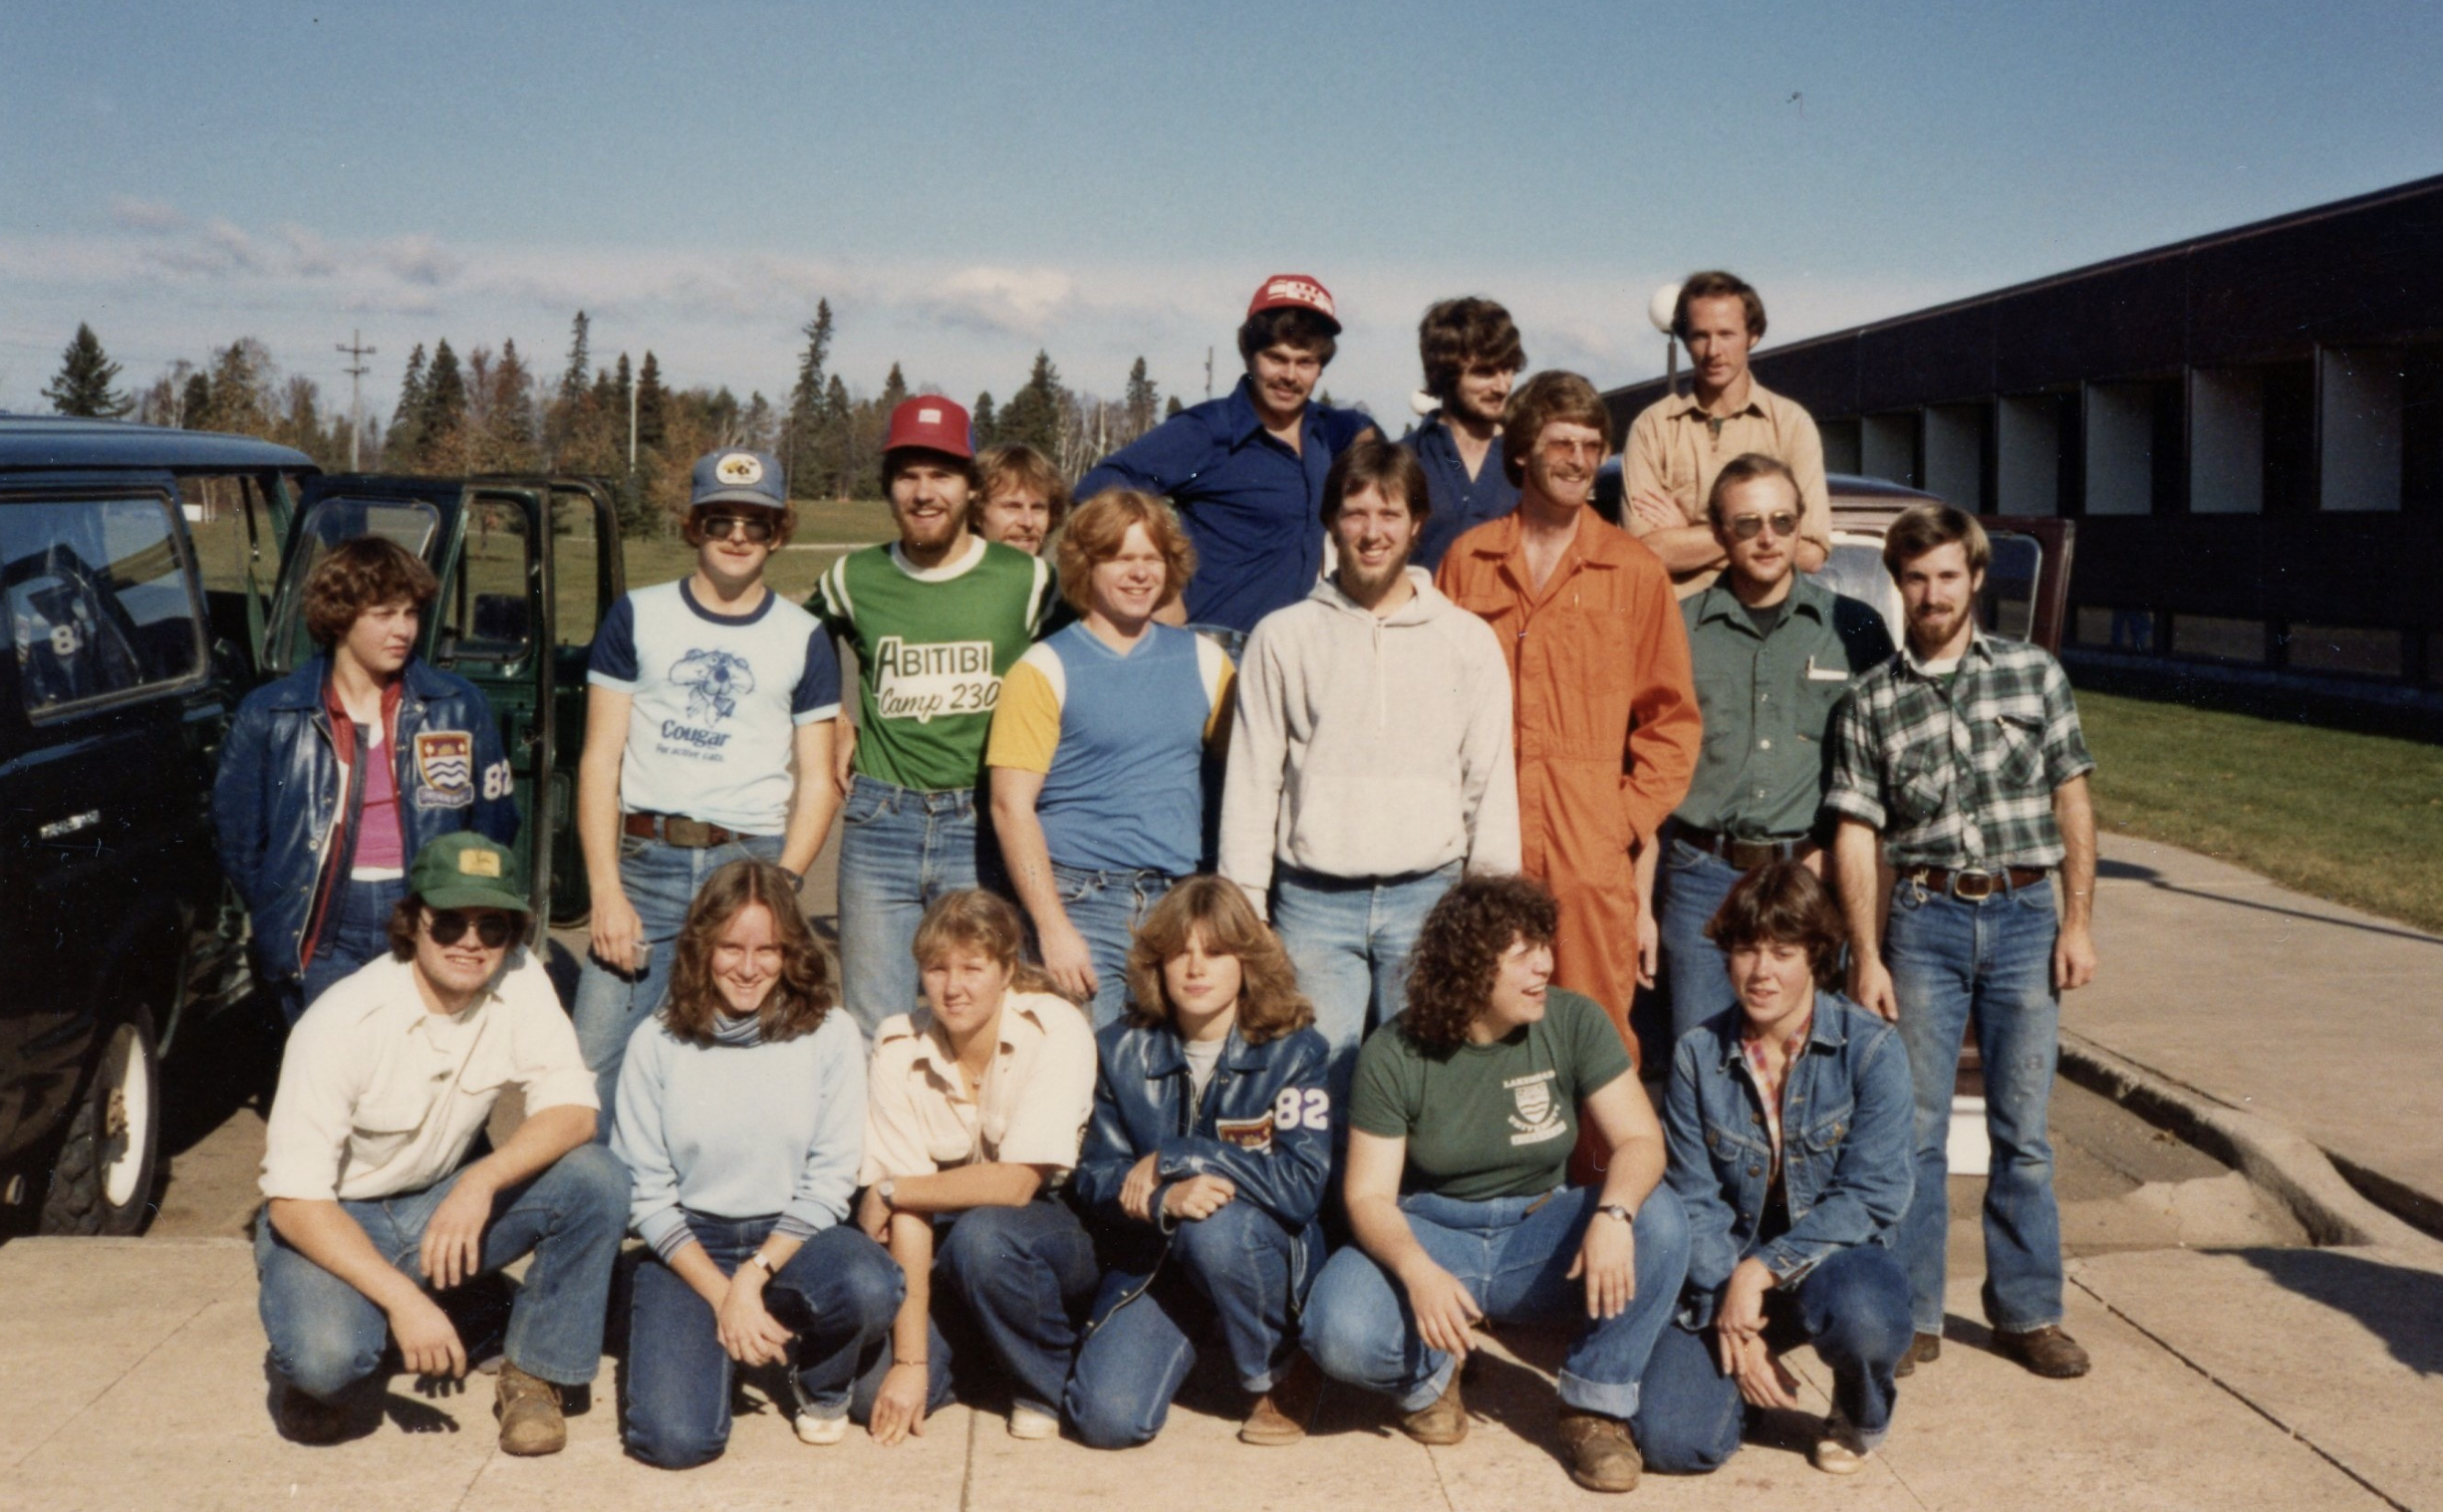 The LU Woodsmen Team (Faye is the fourth from the left in the front row) prepares to leave for the University of New Brunswick’s 1980 Woodsmen Competition.